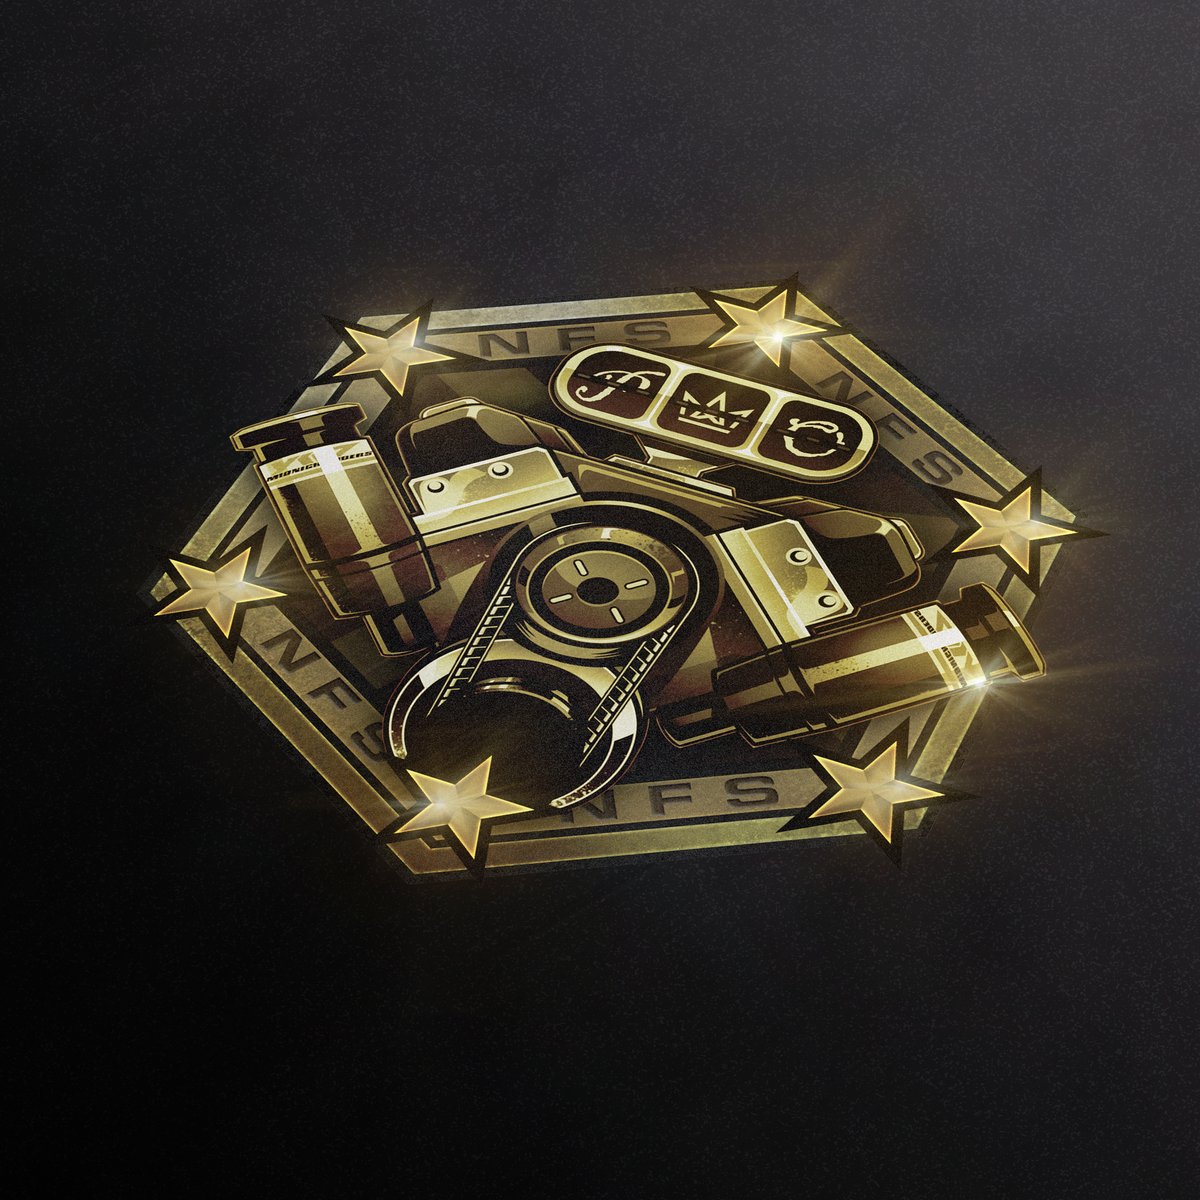 We’ve introduced 'Rank' in Vol. 6, a new way to earn respect and showcase prowess as you play through single-player or dominate multiplayer to climb the ranks. ⭐ This status symbol is prominently displayed on your Banner, letting everyone recognize your achievements. 🏆 When…